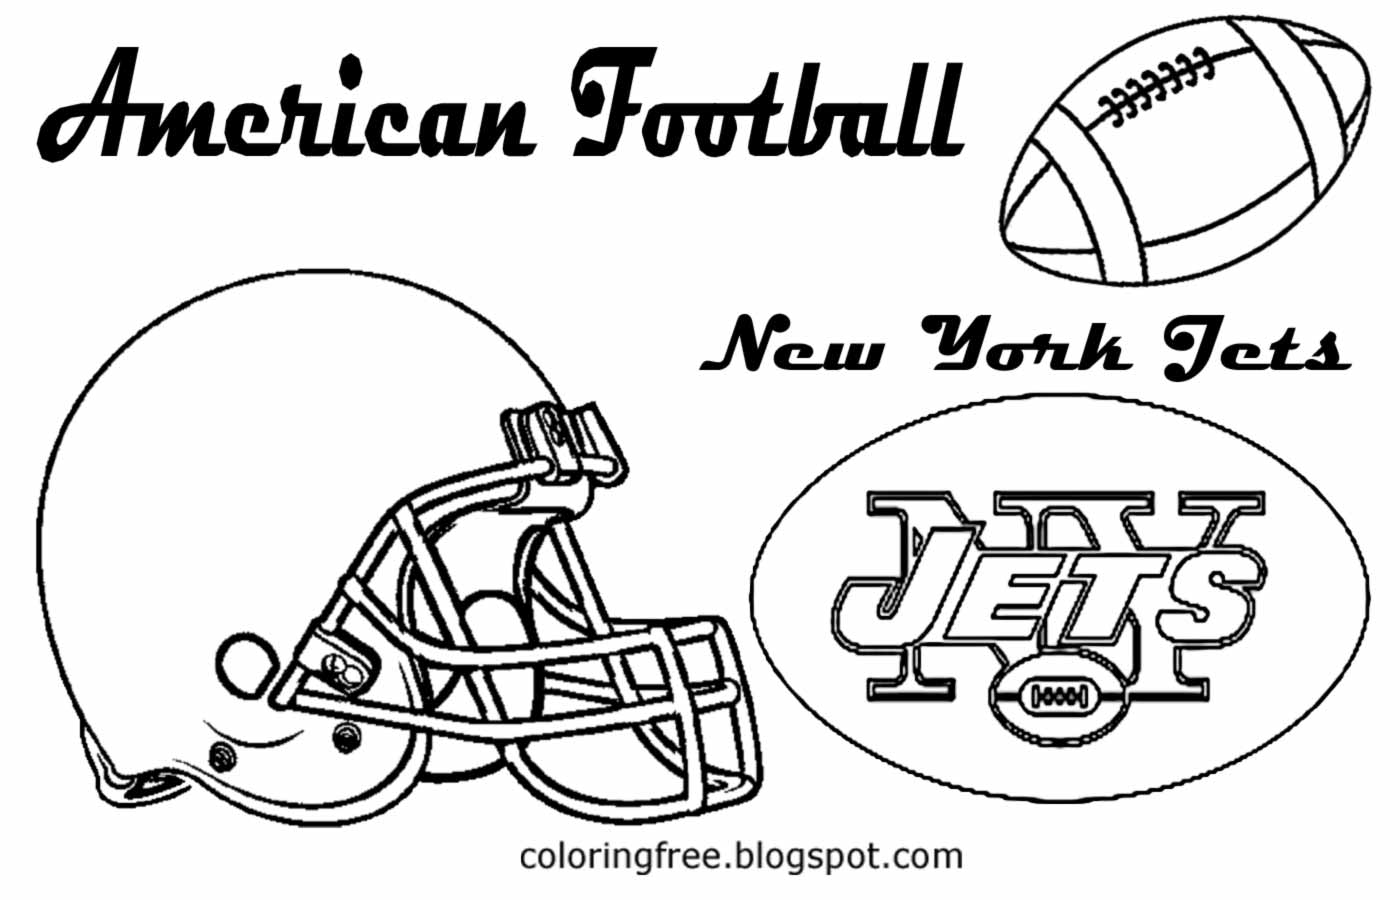 Champion stuff to redden Oil kings Houston Texans proud American AFC football coloring pictures for lads USA sports to print and color pencil drawing